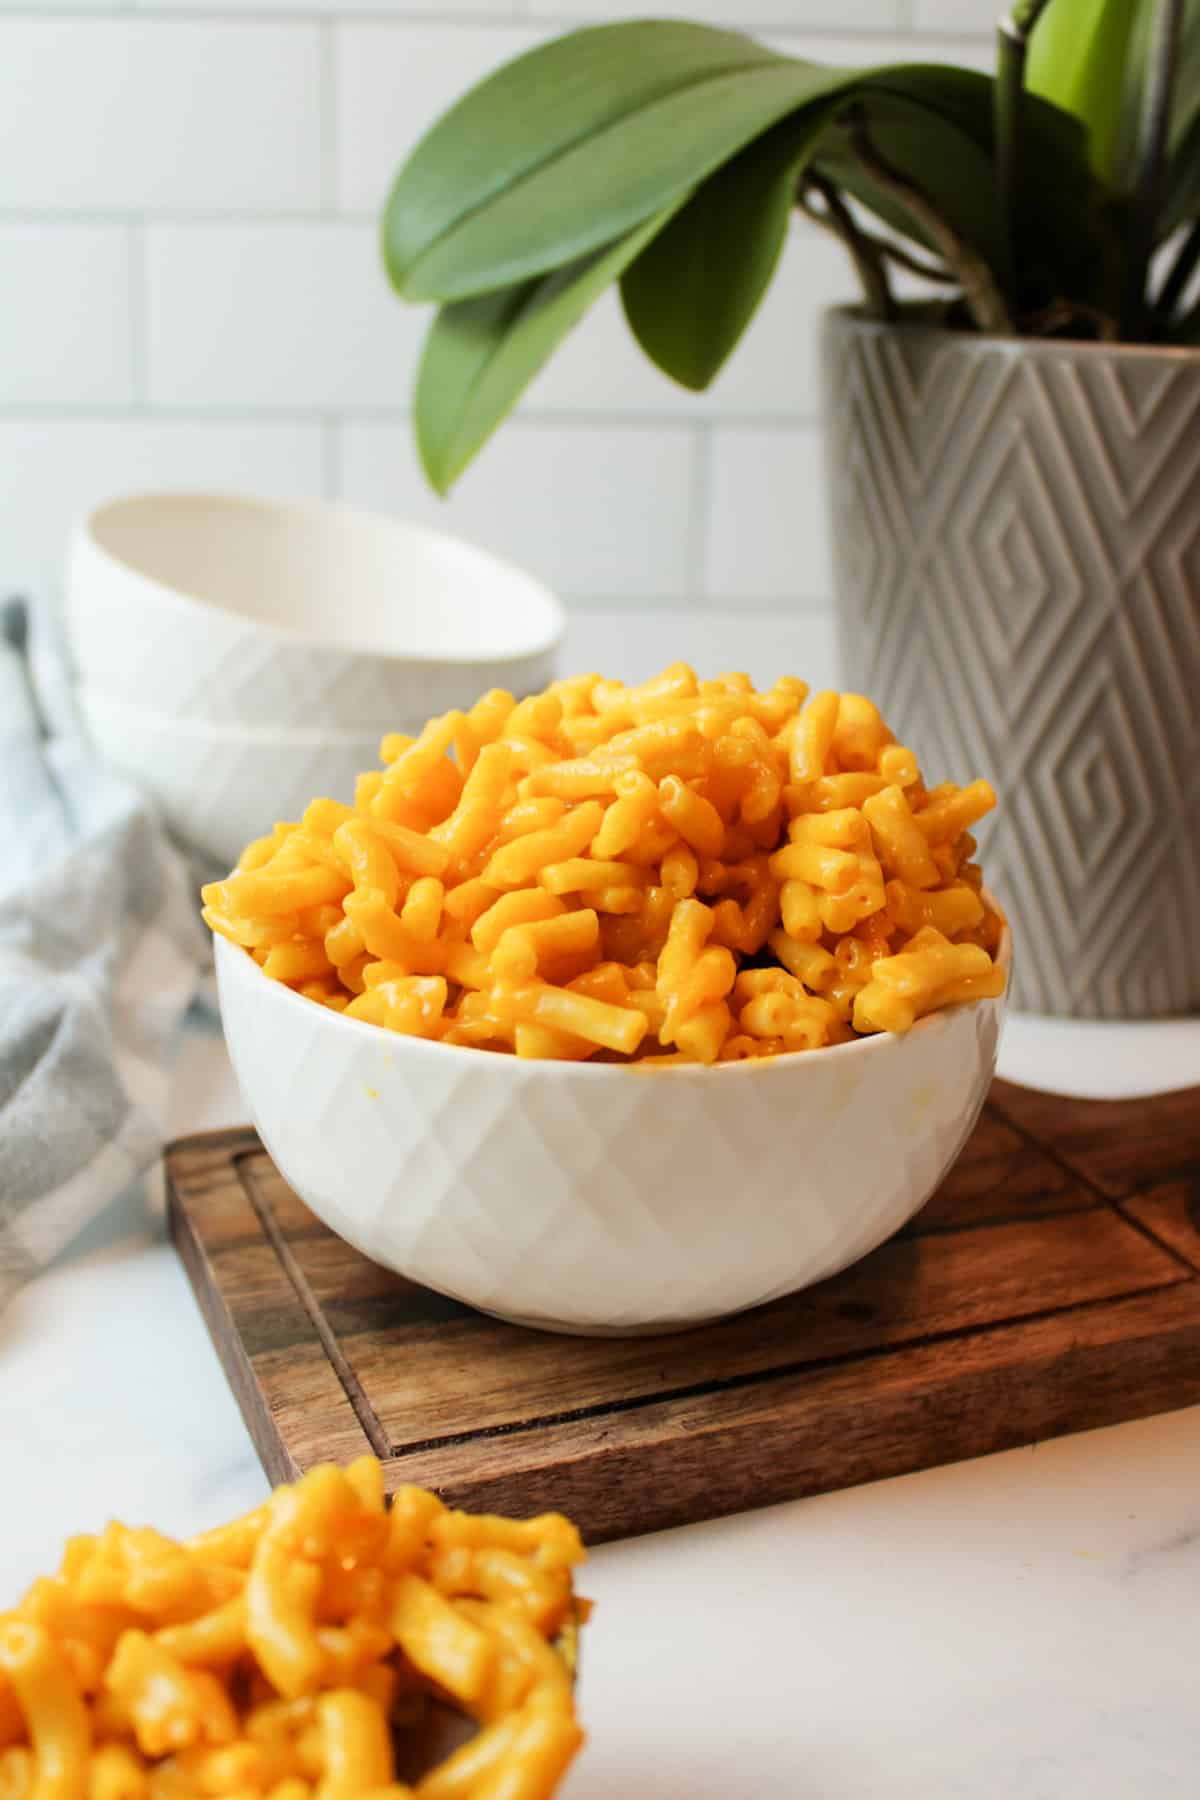 a heaping bowl of mac nad cheese in front of a plant and empty bowls